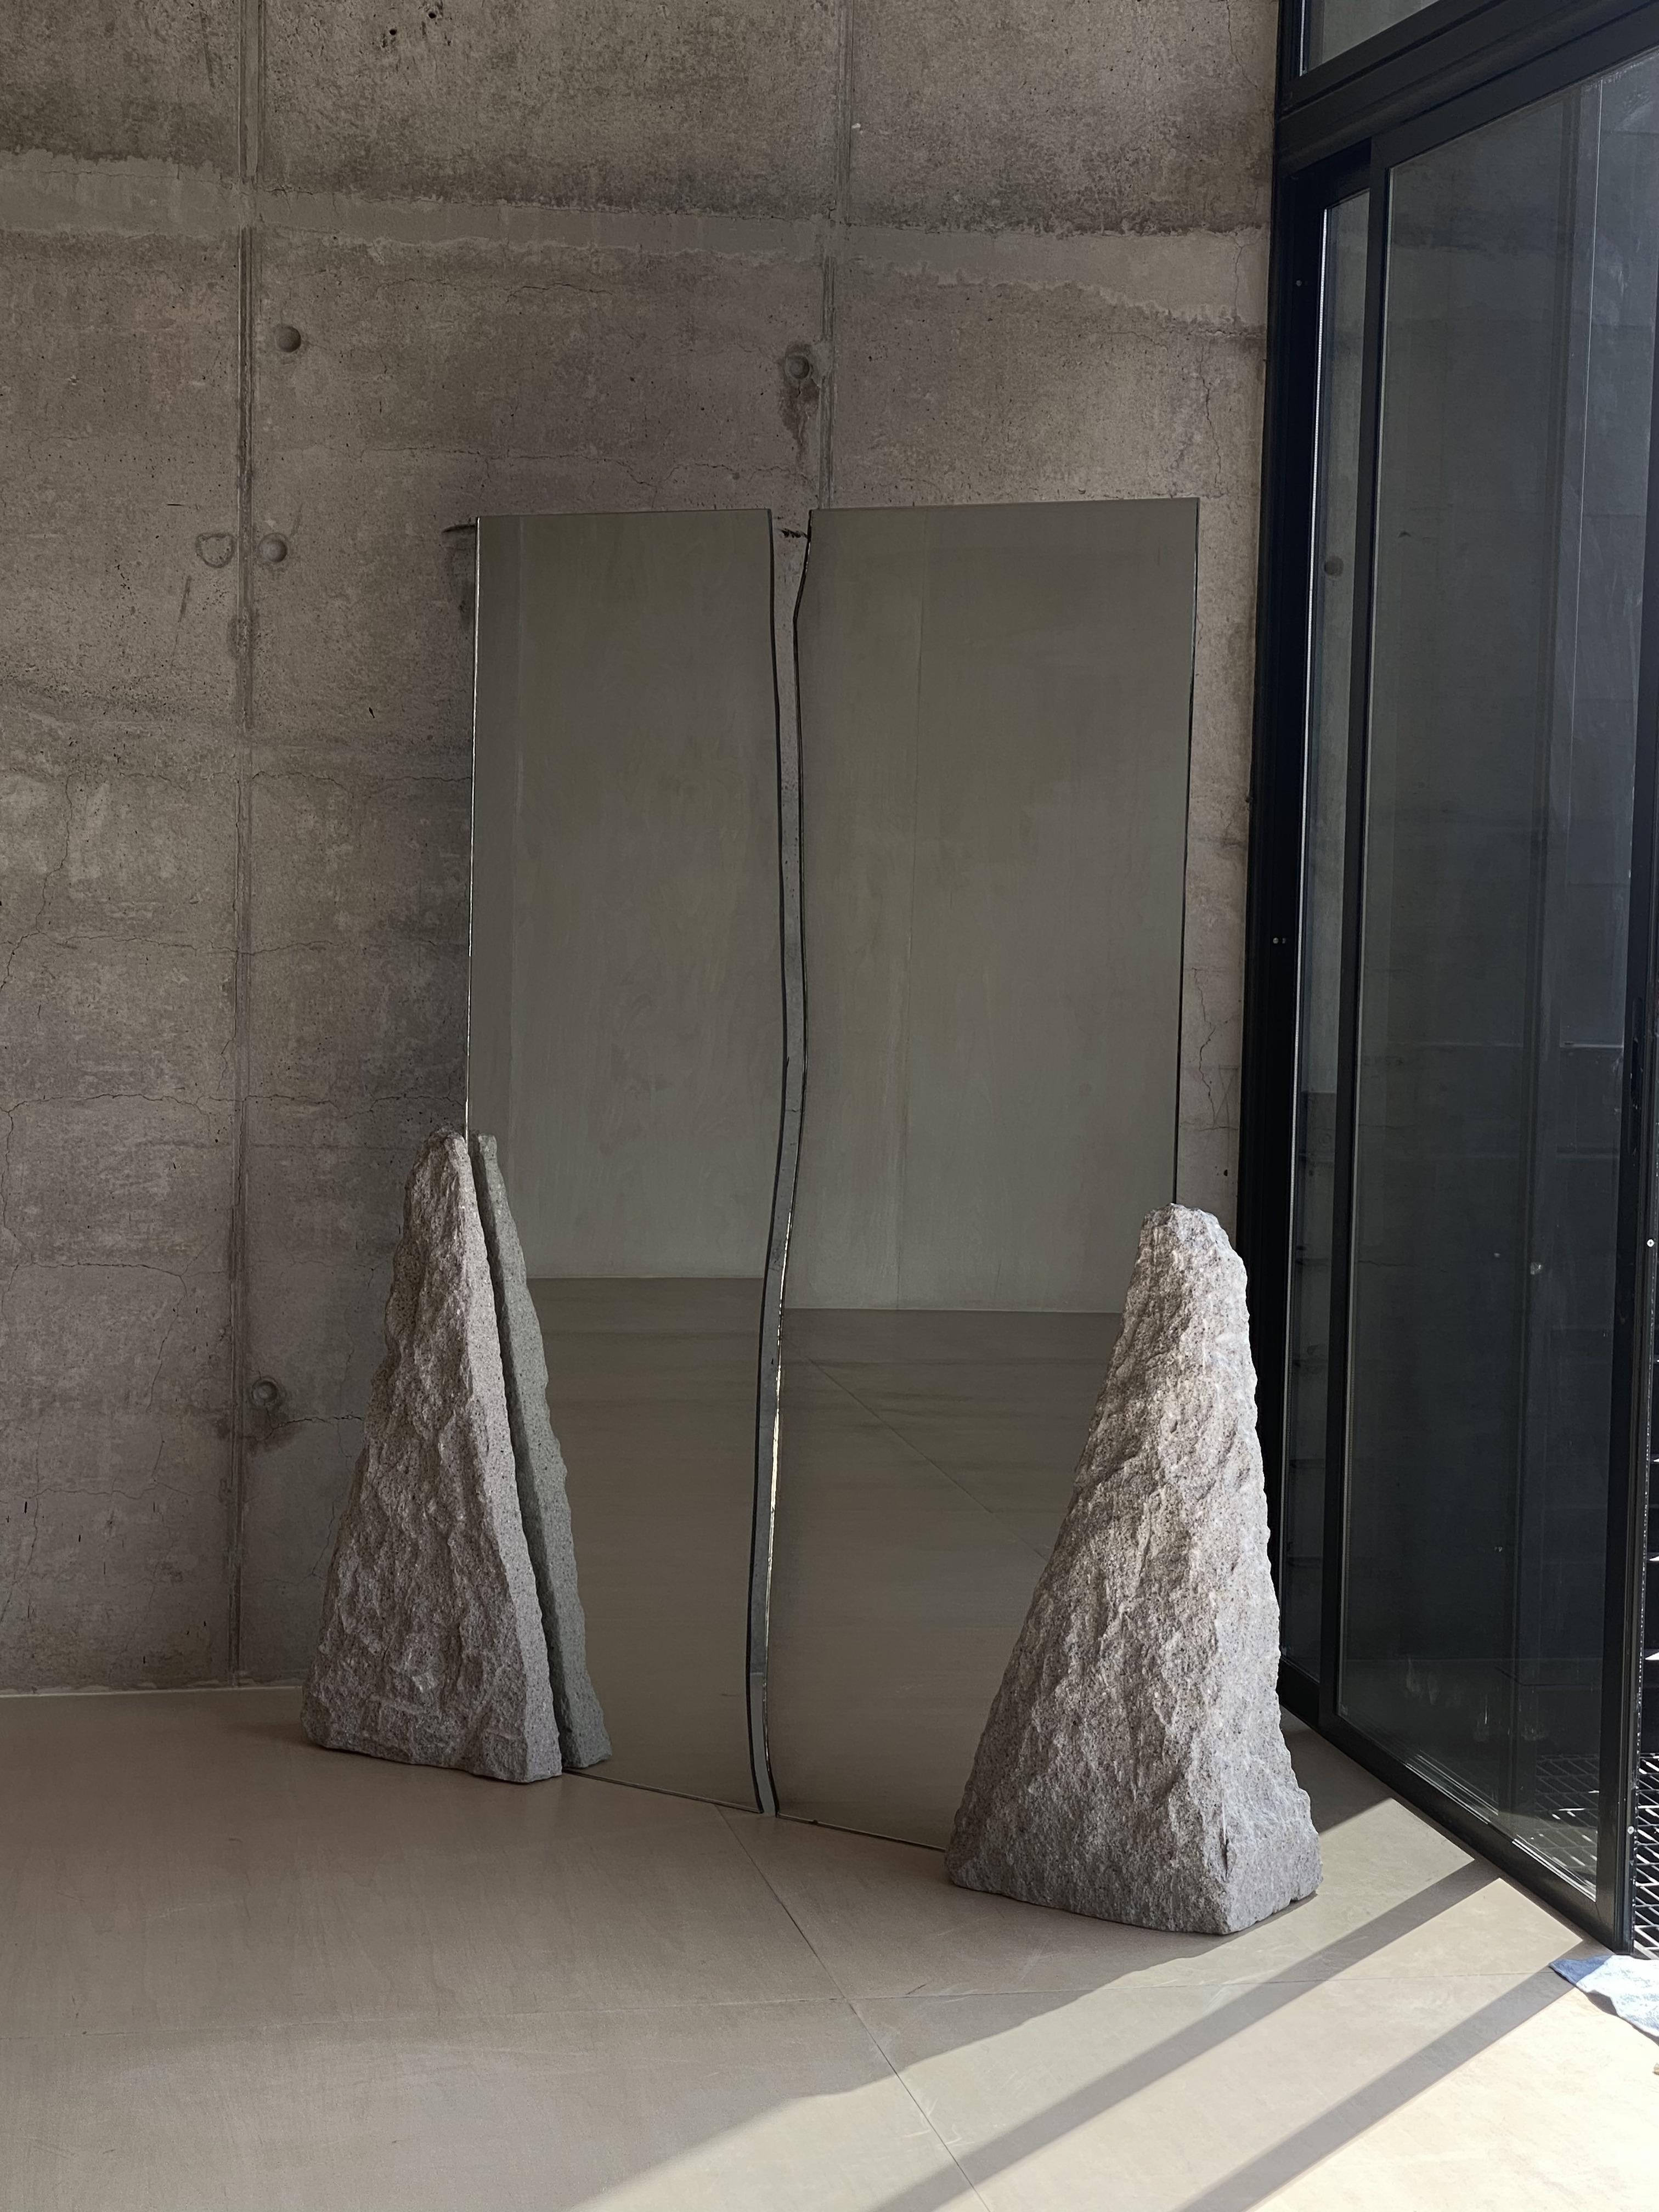 Illusio double mirror by Andres Monnier
One of a Kind.
Dimensions: D 25 x W 80 x H 180 cm - Each mirror
Materials: White Quarry Stone


Andrés Monnier is a Mexican artist born in Guadalajara but based in Ensenada. his purpose is to create